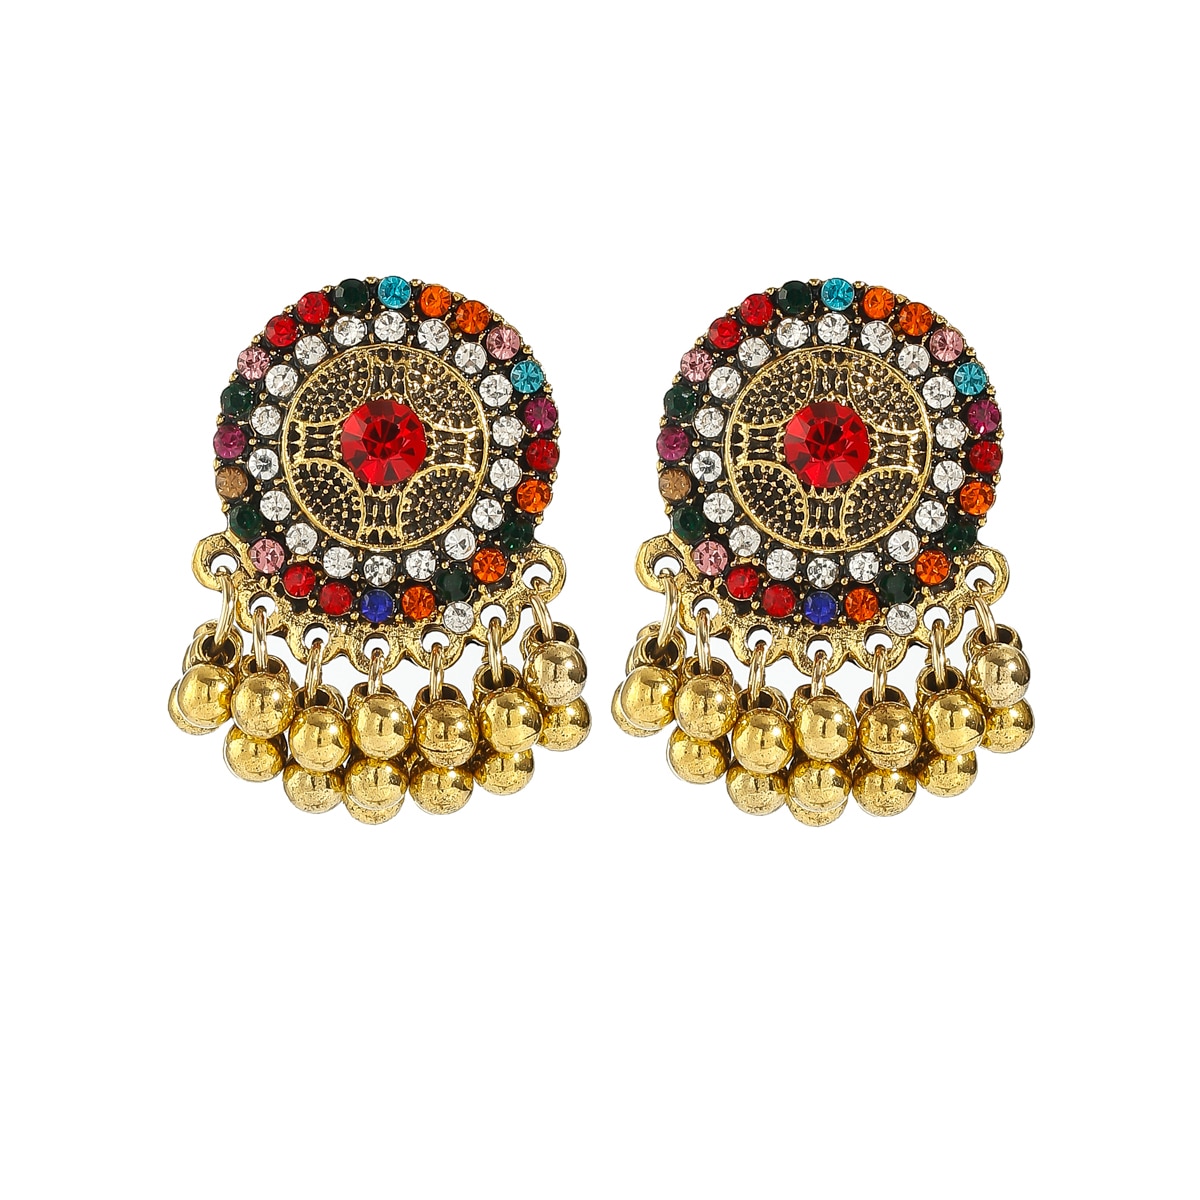 Classic-Ethnic-CZ-Indian-Earrings-For-Women-Gypsy-Round-Alloy-Jhumka-Earring-Fashion-Jewelry-Orecchi-1005004770706519-5